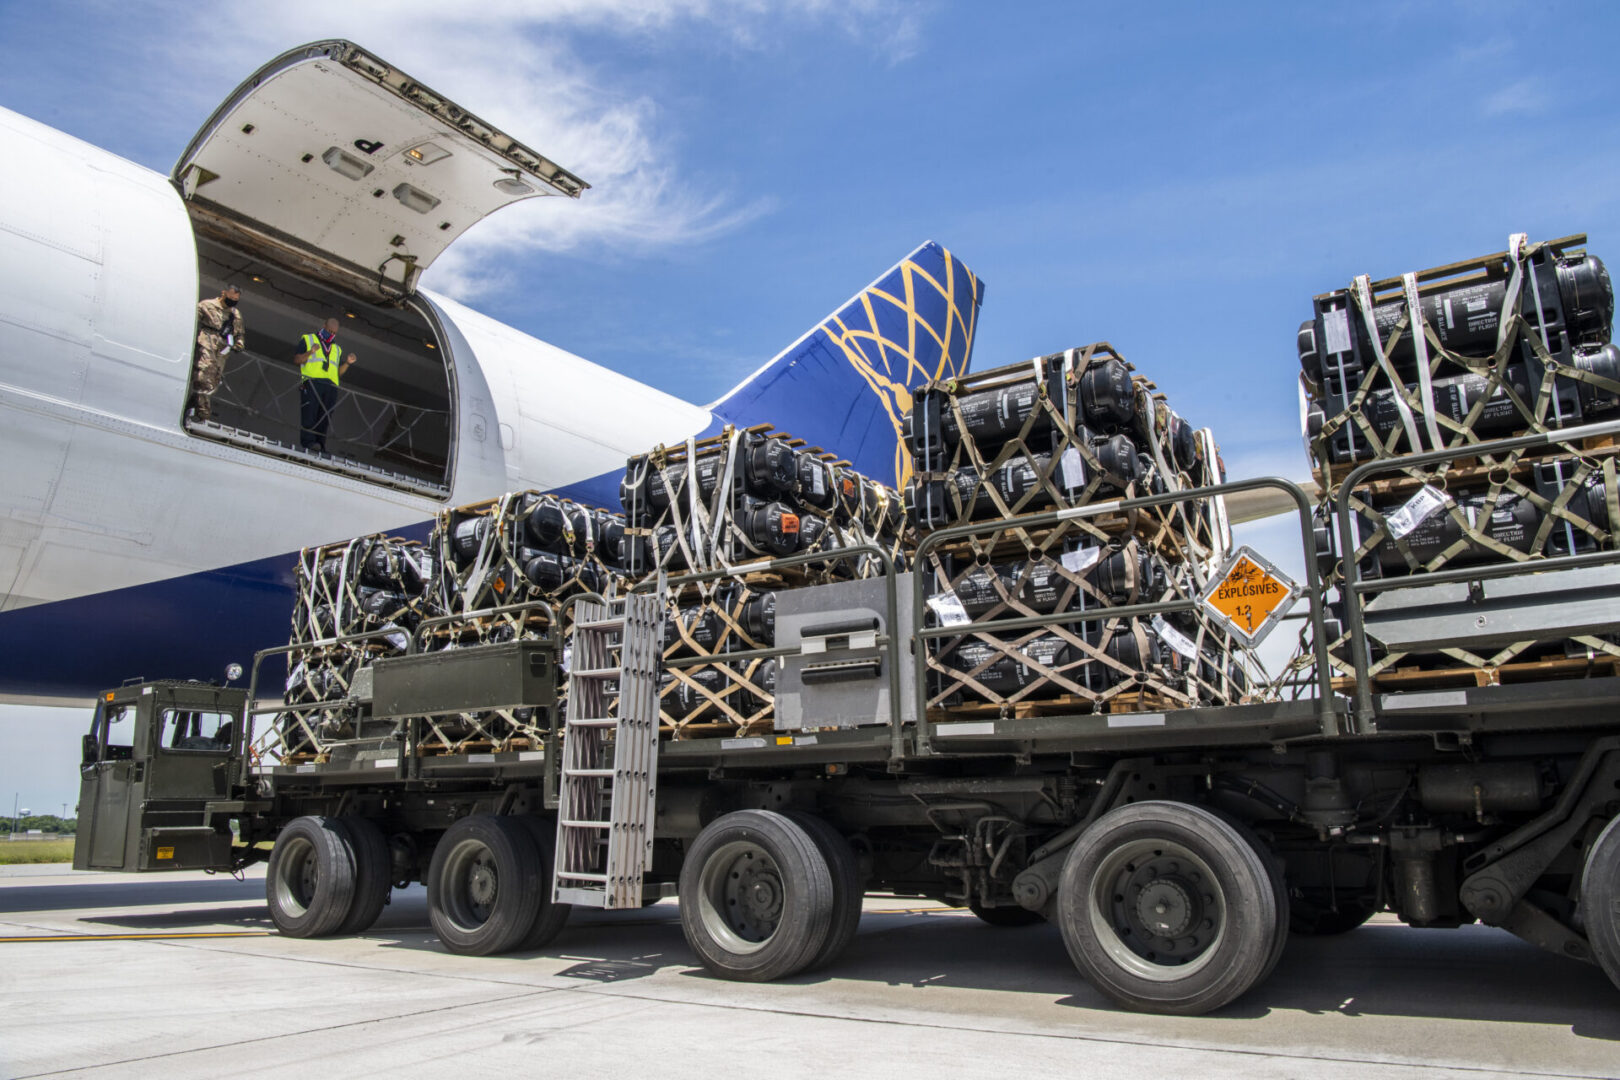 436th Aerial Port Squadron Airmen load cargo being delivered to Ukraine onto a contracted aircraft at Dover Air Force Base, Delaware, June 16, 2020. Contracted aircraft stopped at Dover AFB to pick up cargo as part of a foreign military sales project. The U.S. is committed to the sovereignty and territorial integrity of Ukraine. The two countries continue to strengthen their partnership first initiated in 1993. (U.S. Air Force photo by Senior Airman Christopher Quail)